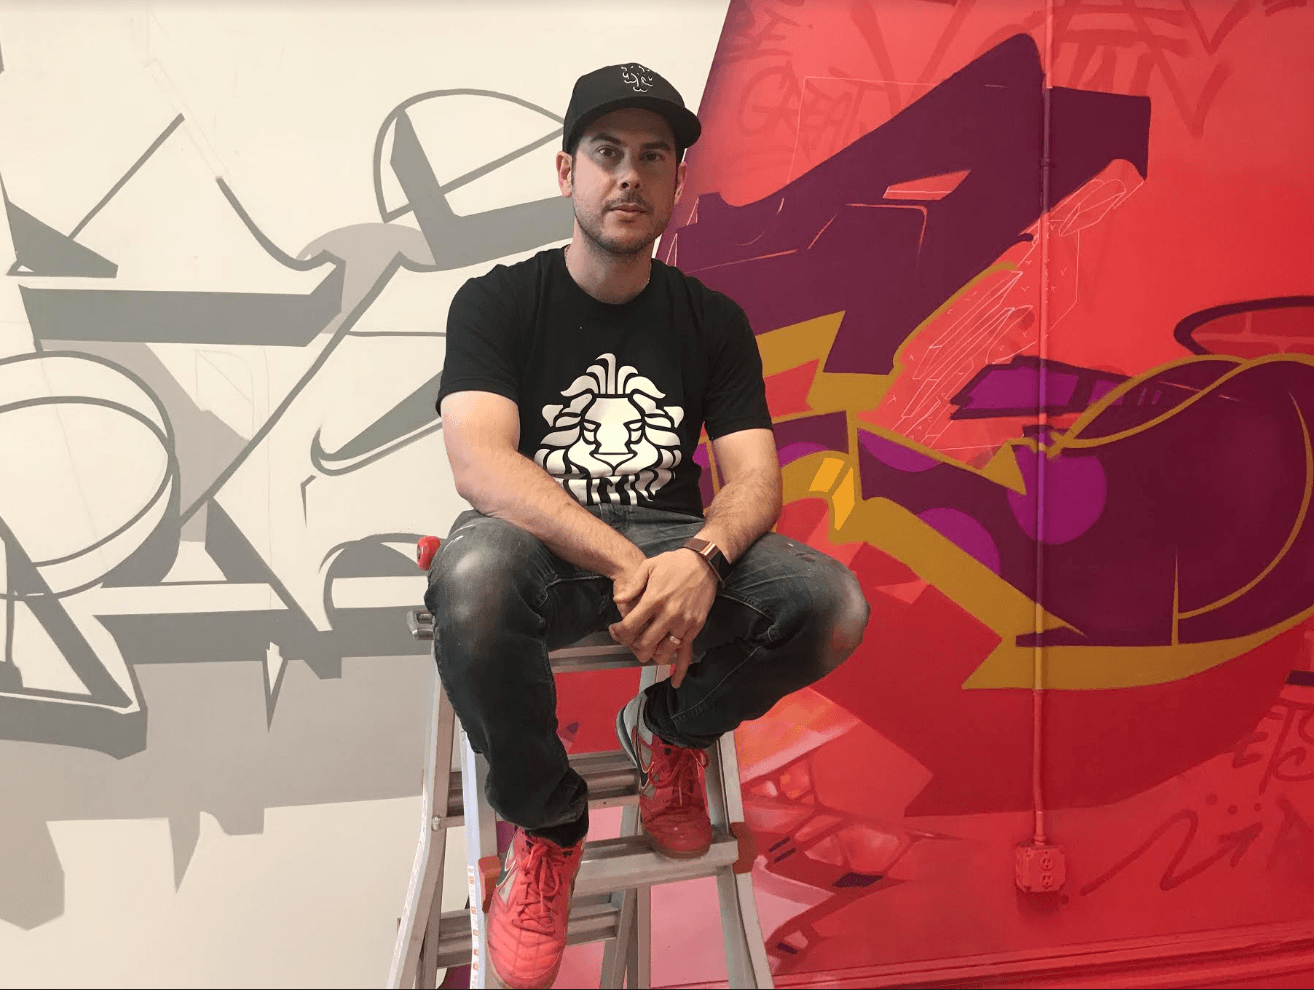 Artist Epic Uno’s graffiti mural inside the Greenwich Arts Council has a section of the wall that’s very vibrant, while also showcasing the outline of the traditional graffiti piece. The mural will be unveiled at Arts Alive! where Epic Uno will be live graffiti painting that evening.